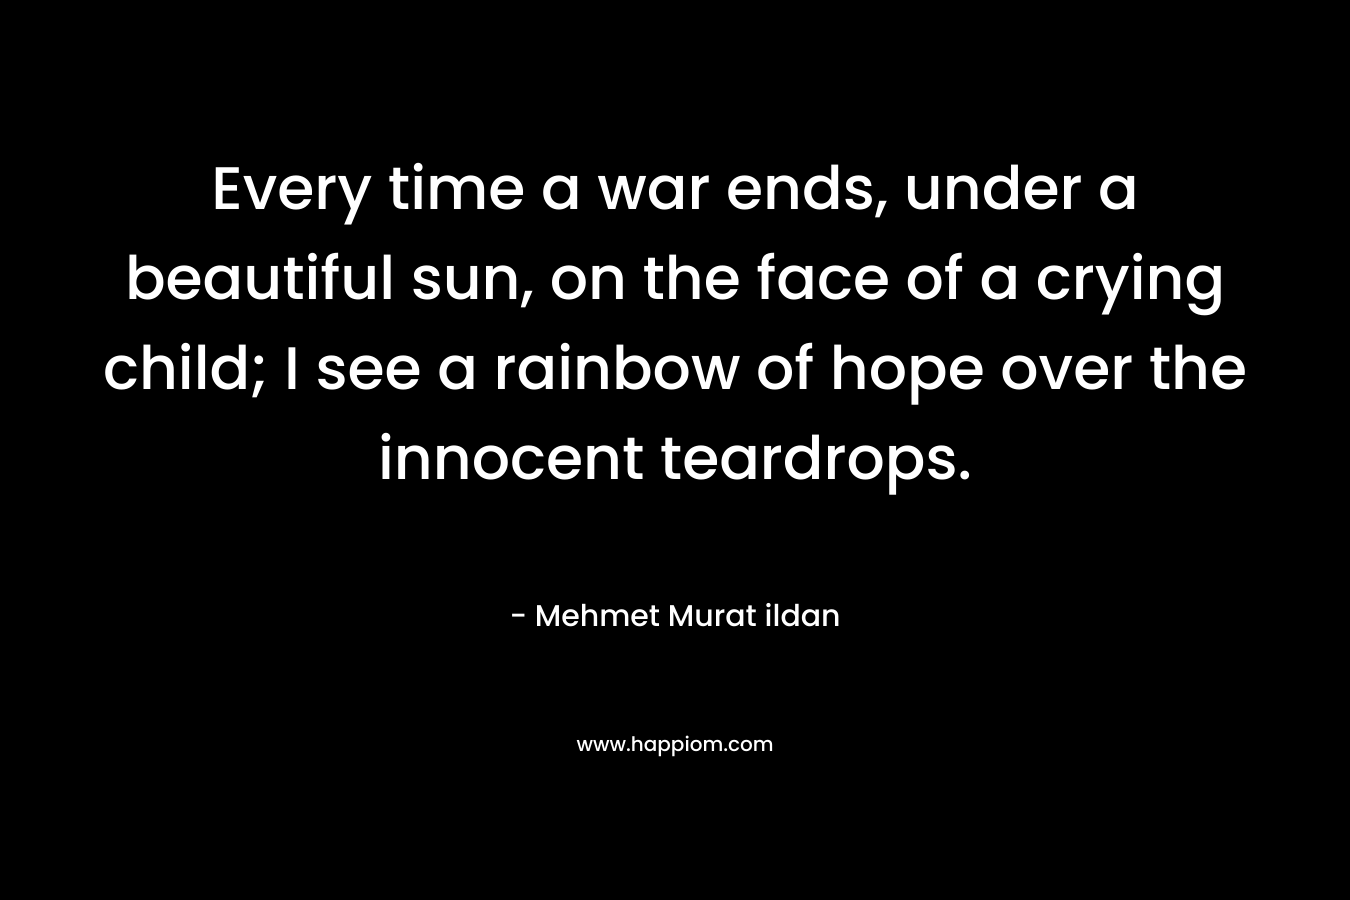 Every time a war ends, under a beautiful sun, on the face of a crying child; I see a rainbow of hope over the innocent teardrops.